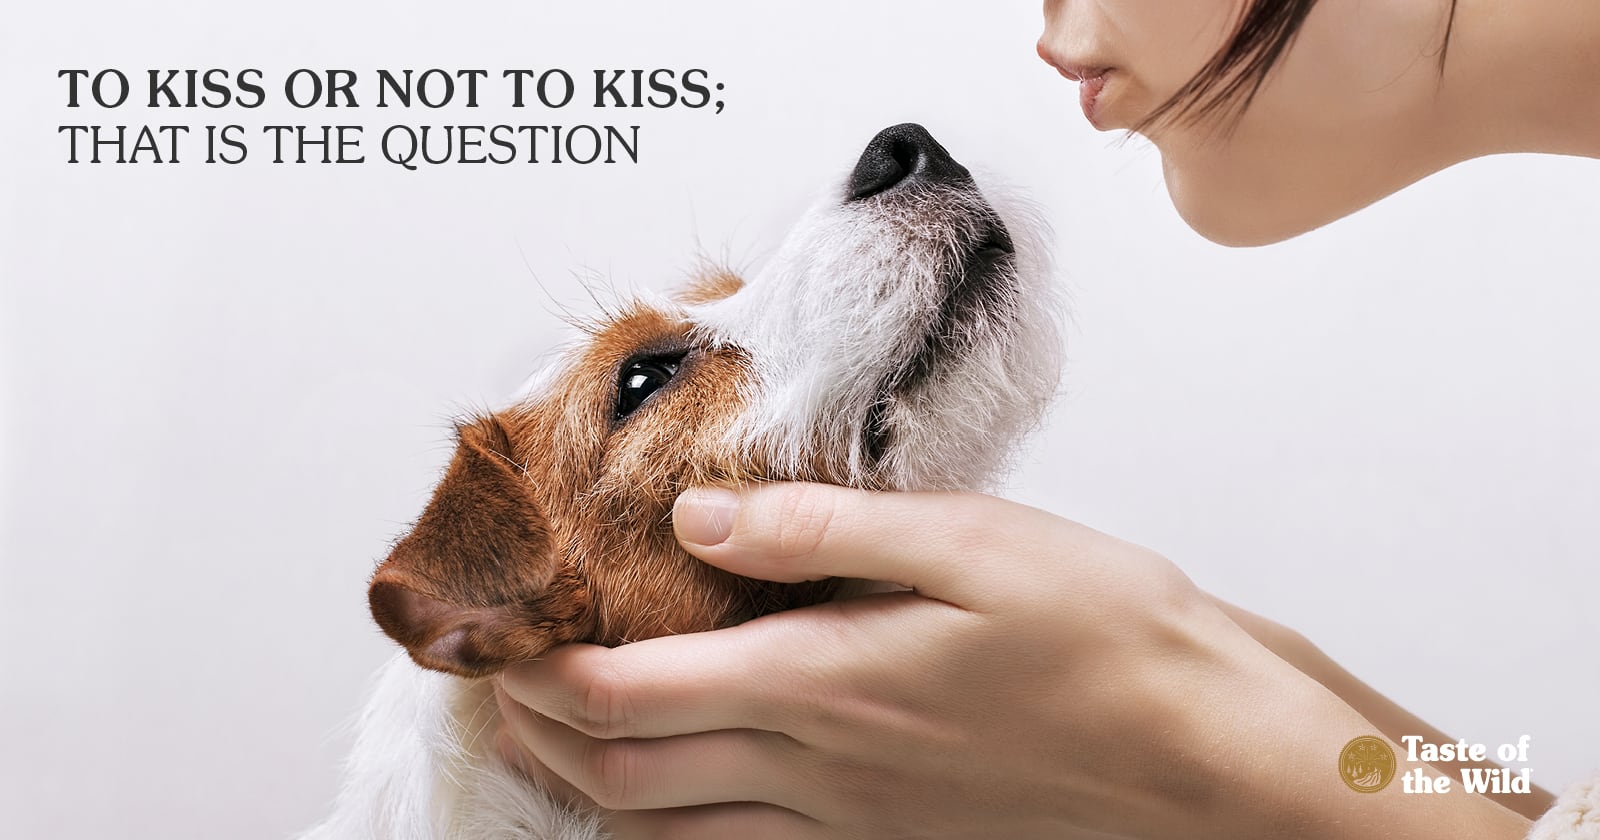 A close-up of a woman leaning in to kiss a dog on the mouth.